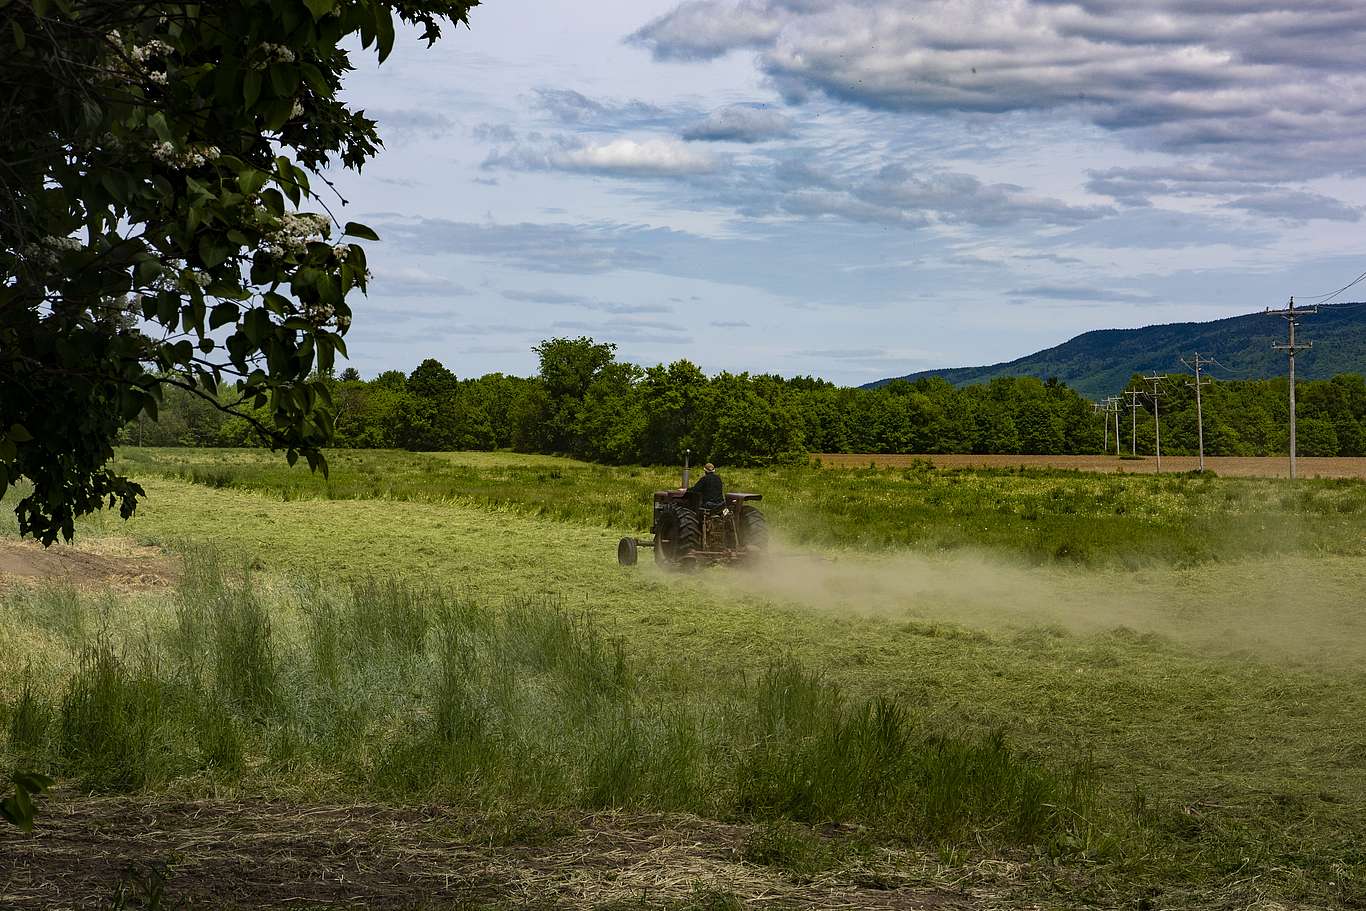 A photo of a tractor haying a verdant field.